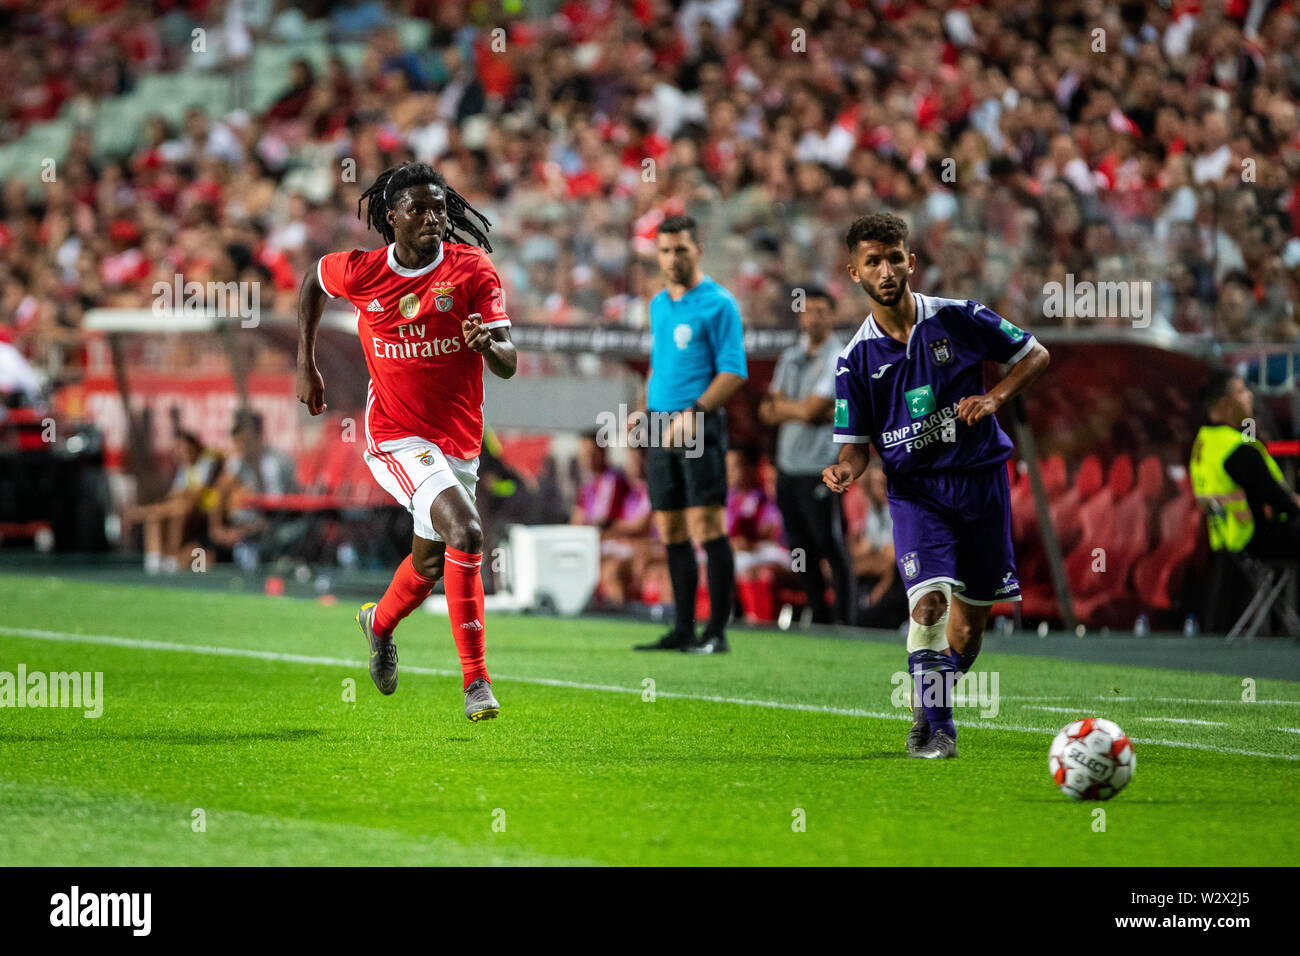 Lisbon, Portugal. 10th July, 2019. David Tavares of SL Benfica in action during the Pre-Season football match 2019/2020 between SL Benfica vs Royal Sporting Club Anderlecht. (Final score: SL Benfica 1 - 2 Royal Sporting Club Anderlecht) Credit: SOPA Images Limited/Alamy Live News Stock Photo